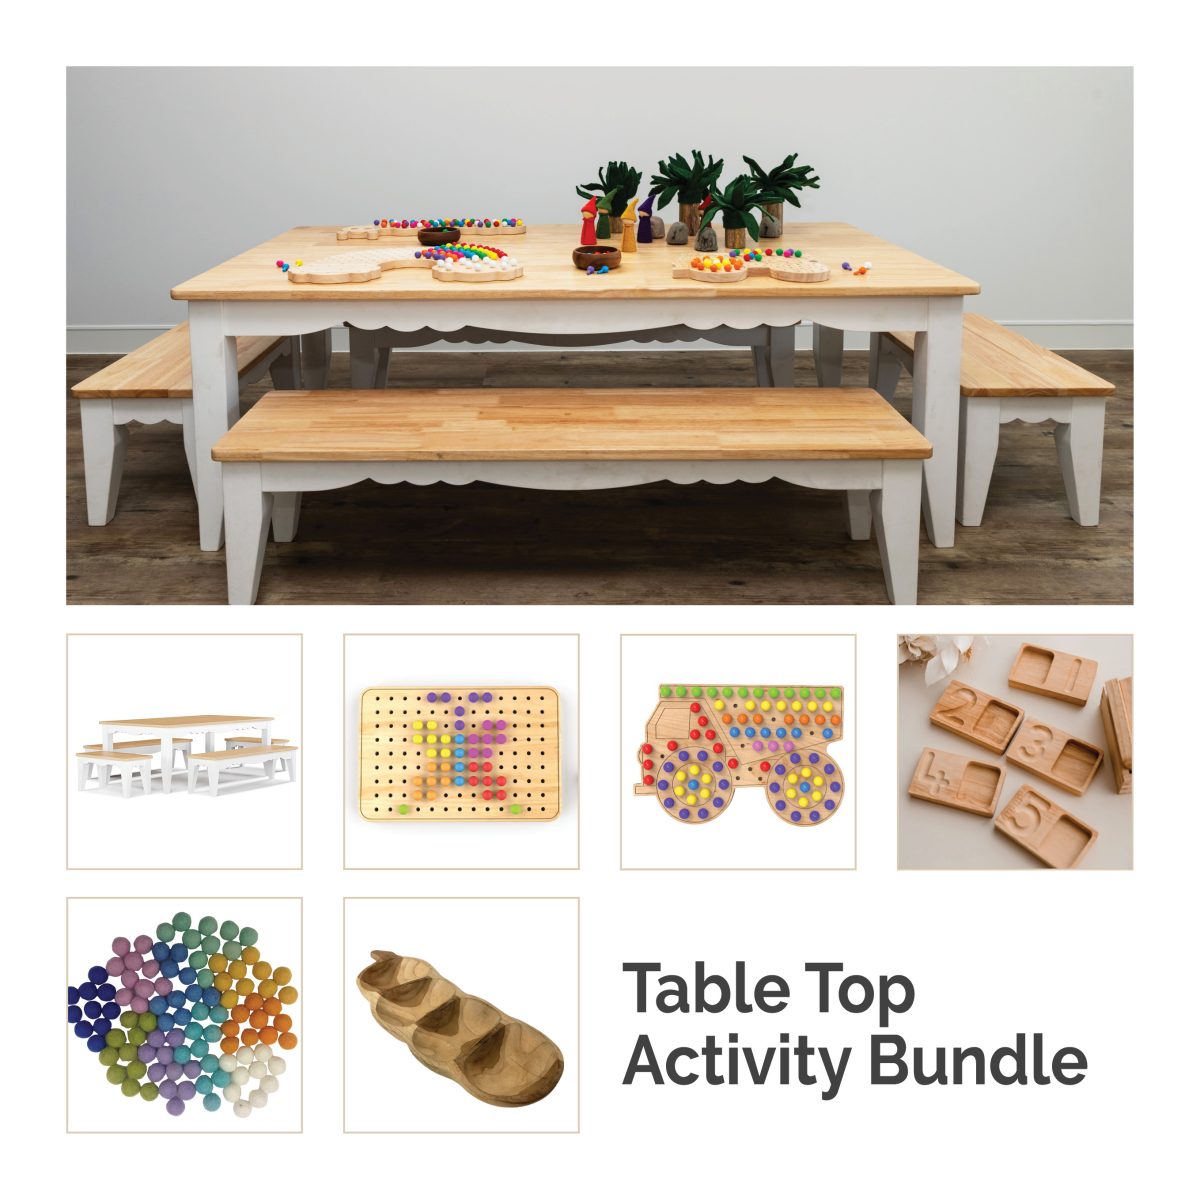 The Bowral Table and Activity Bundle